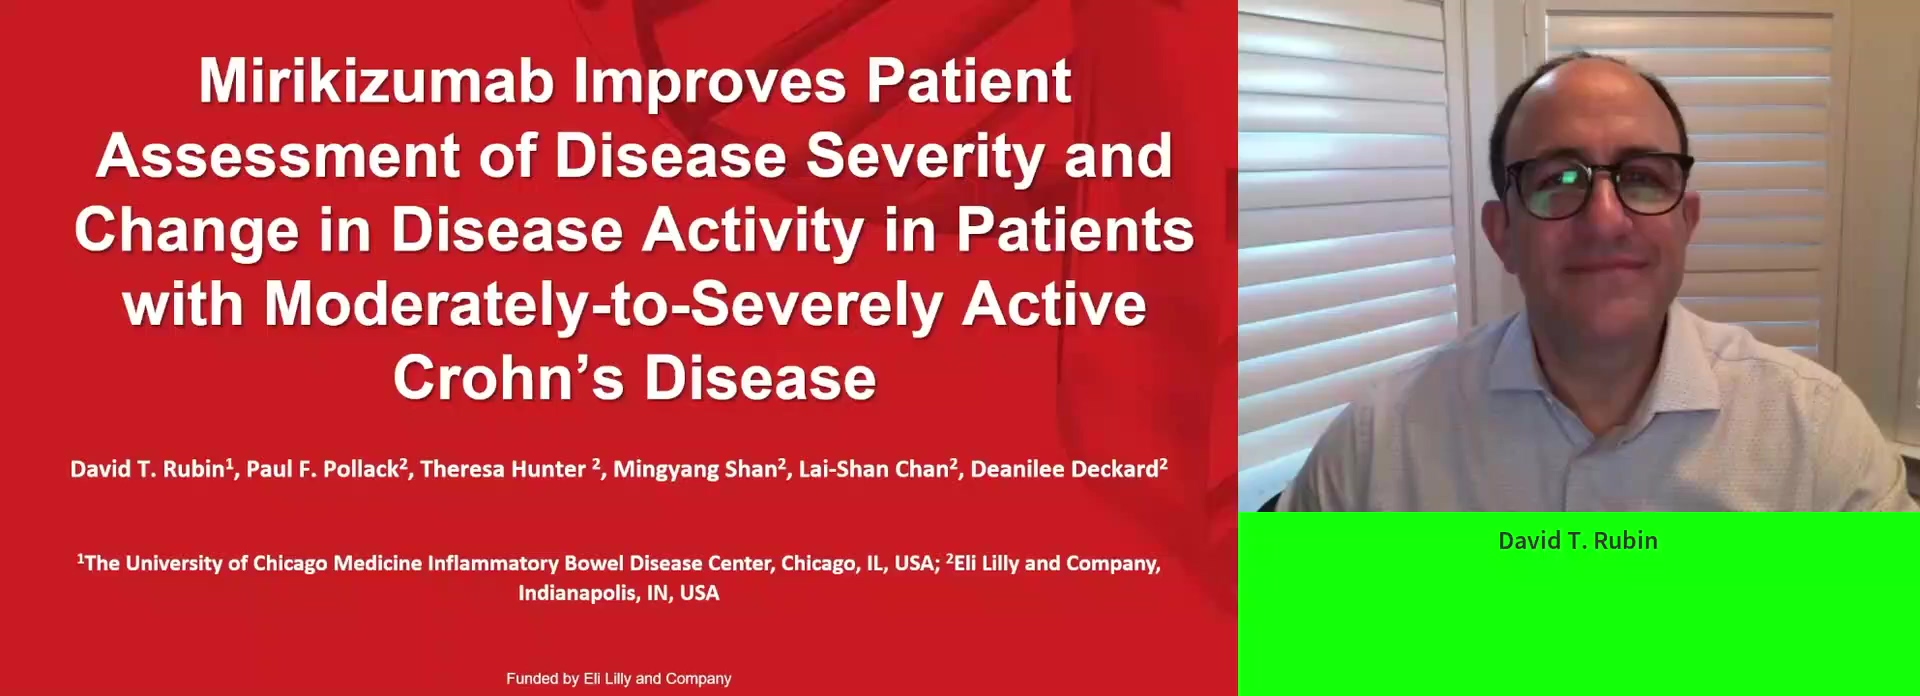 MIRIKIZUMAB IMPROVES PATIENT ASSESSMENT OF DISEASE SEVERITY AND CHANGE IN DISEASE ACTIVITY IN PATIENTS WITH MODERATELY TO SEVERELY ACTIVE CROHN’S DISEASE